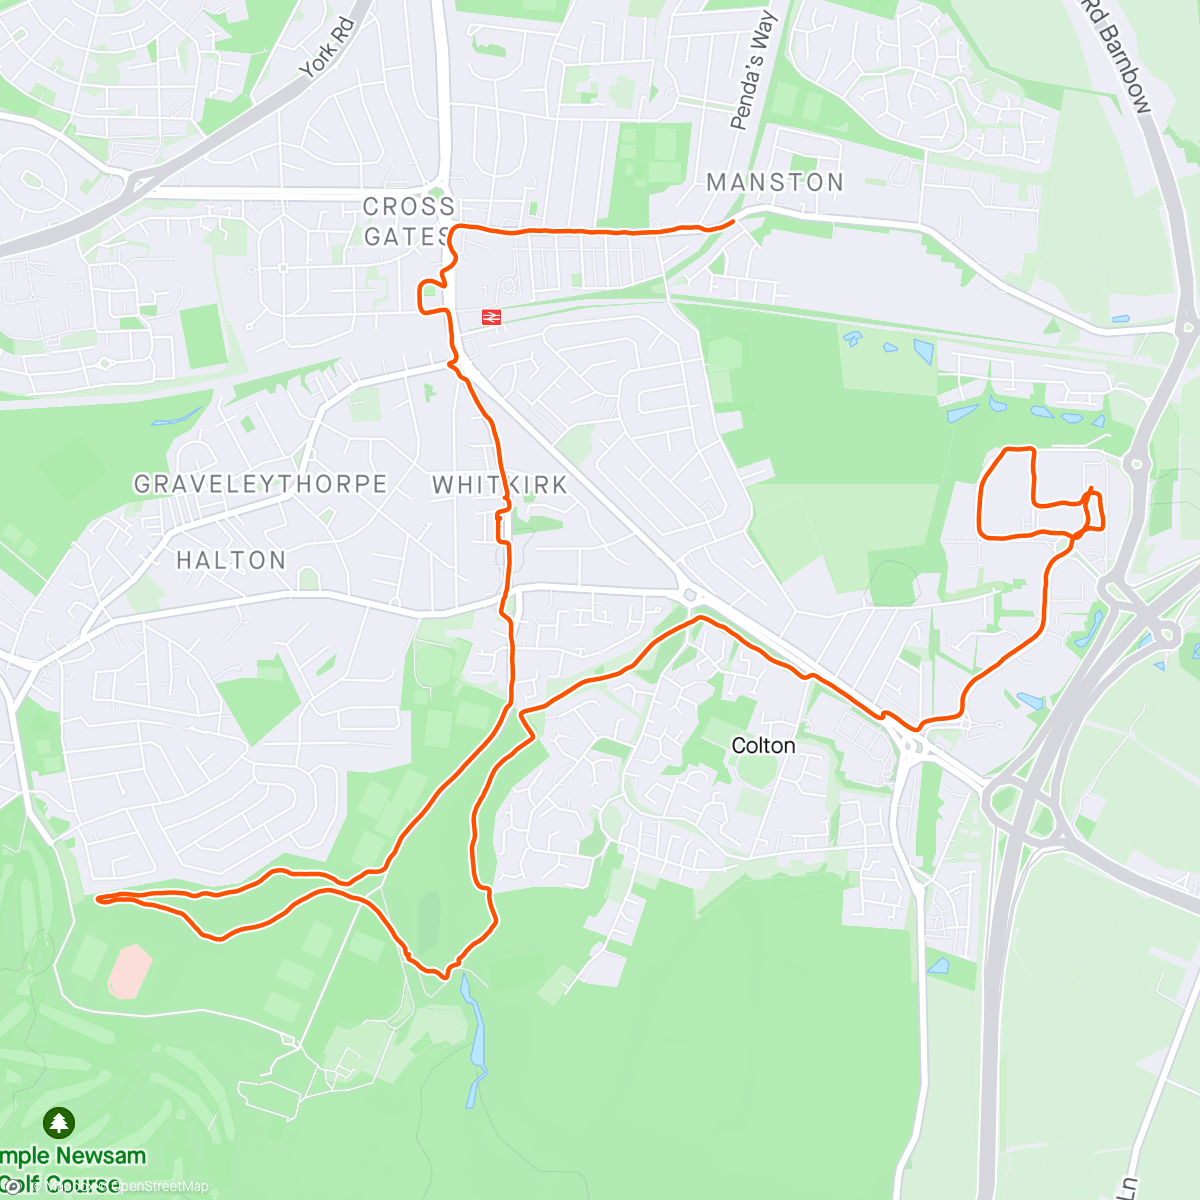 Map of the activity, Too good a Sunday for a recovery run. Legs sore but pain disappeared after 1km. Went surveying the springtime flowers. Bluebells, tulips in bloom and dandelions going off soon. No more daffodils.